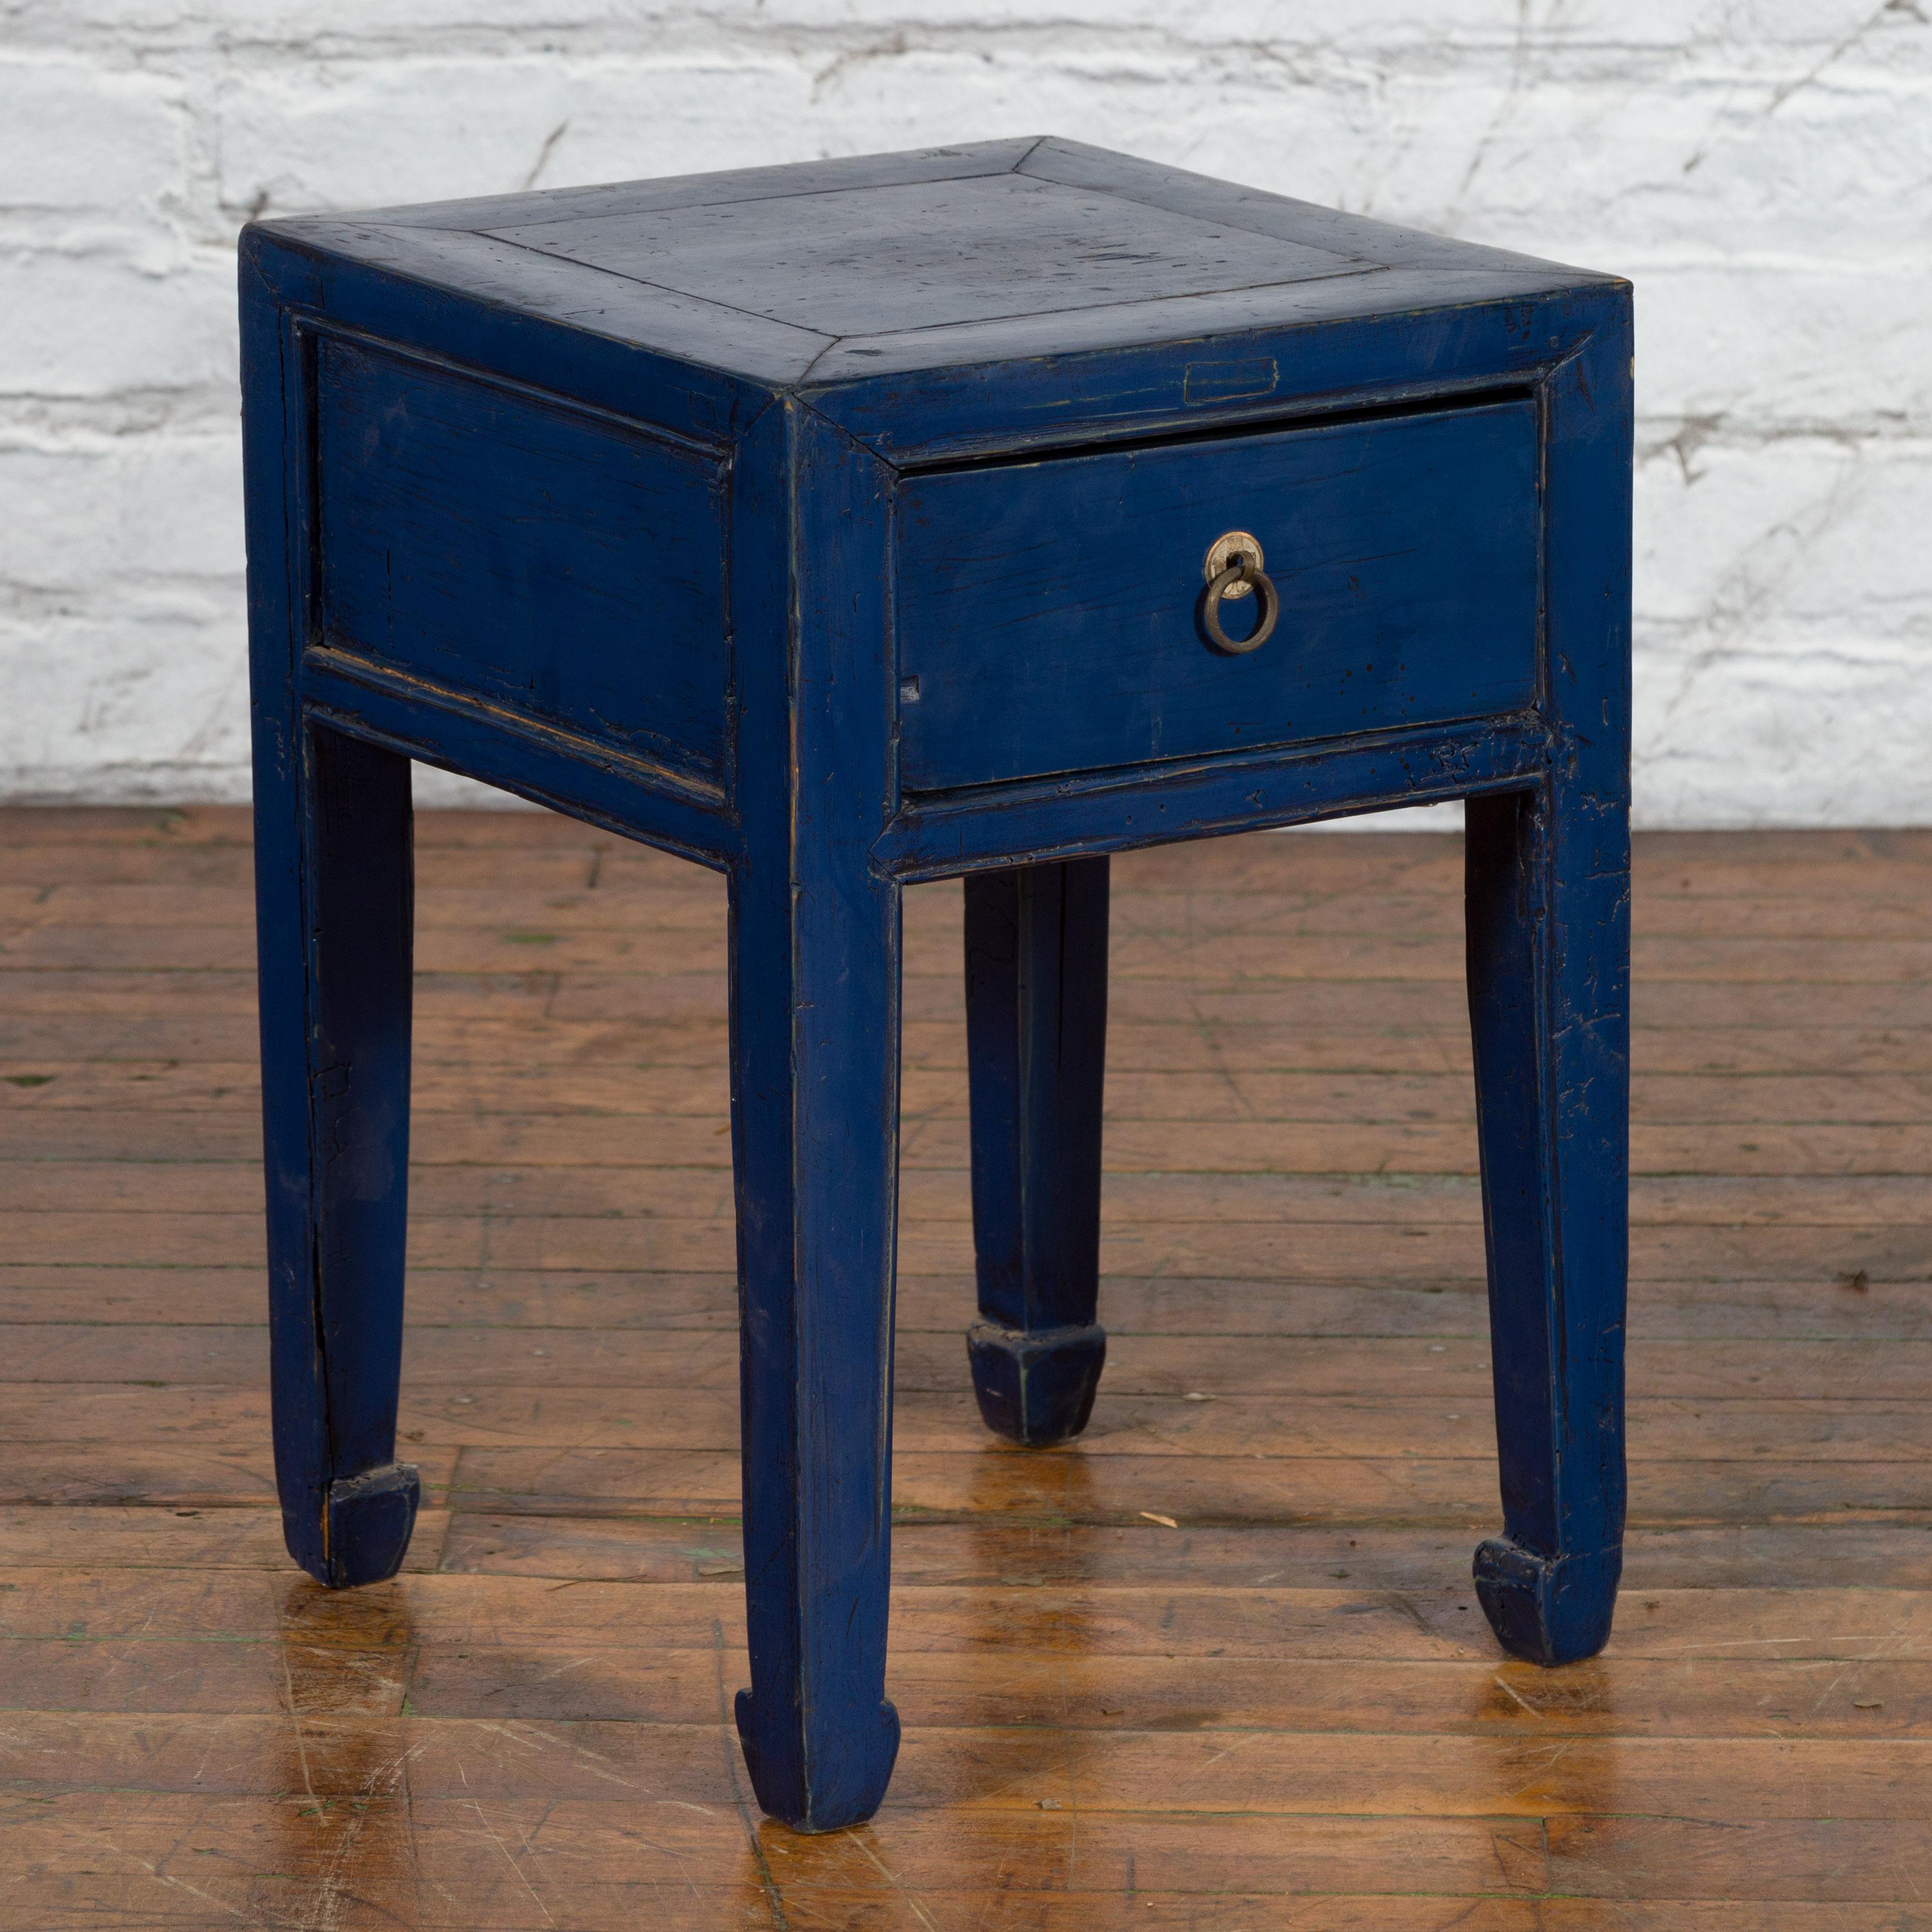 A Chinese Ming Dynasty style blue lacquer side table from the early 20th century with single drawer and horse hoof legs. Created in China during the early years of the 20th century, this Ming style blue lacquer side table features a square top with